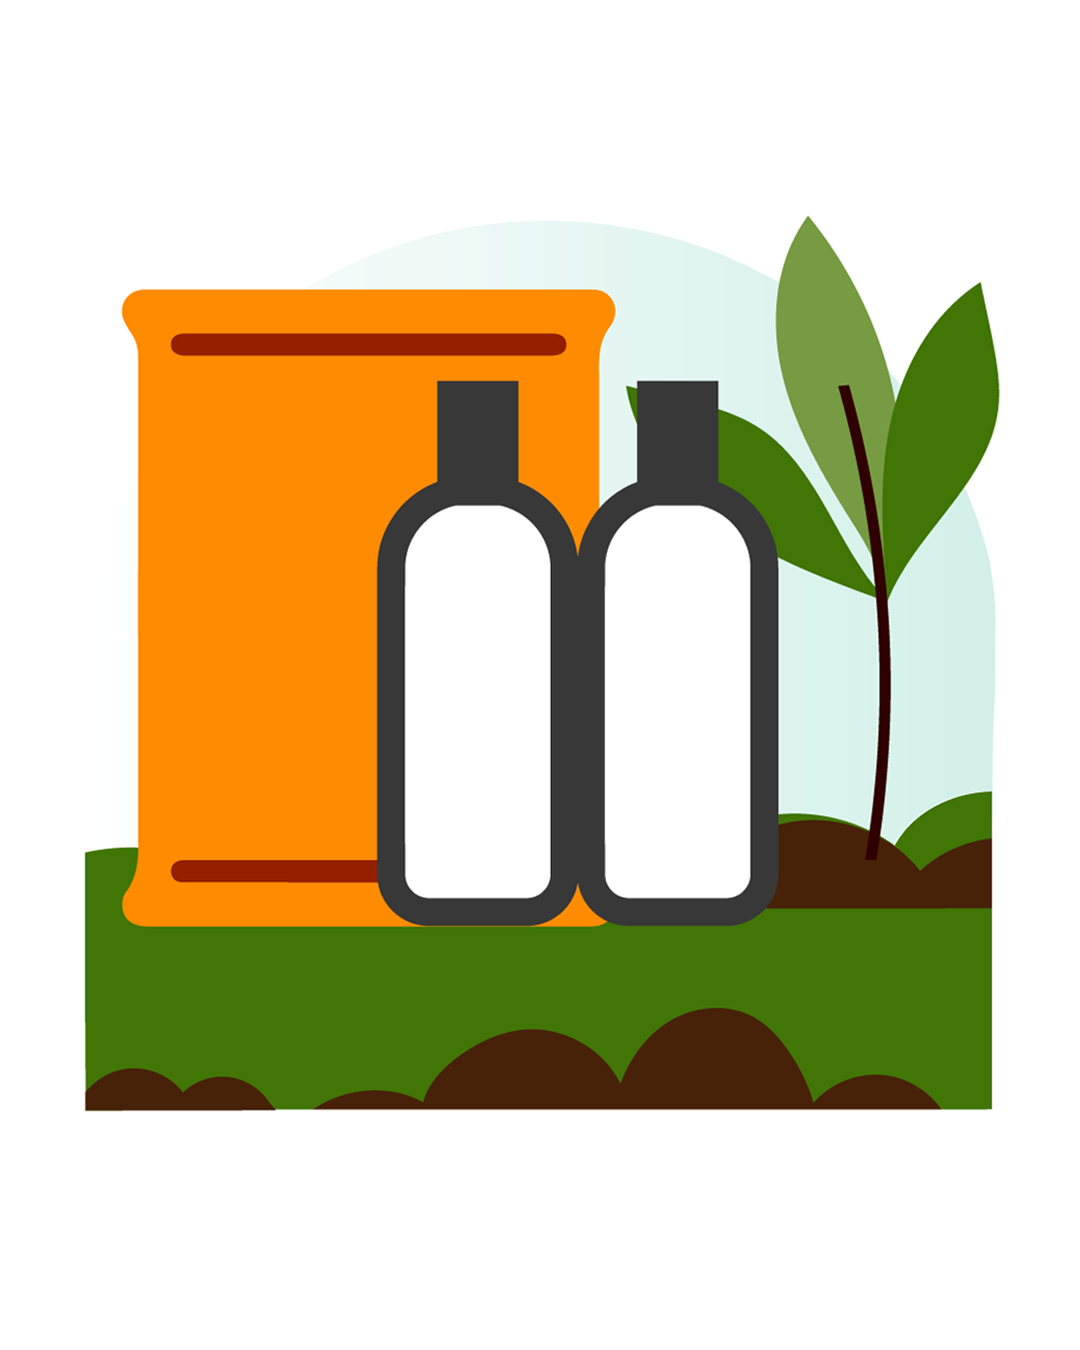 iffco icon (1).png__PID:faf1a7fd-5027-4998-9b38-61e20efcd387